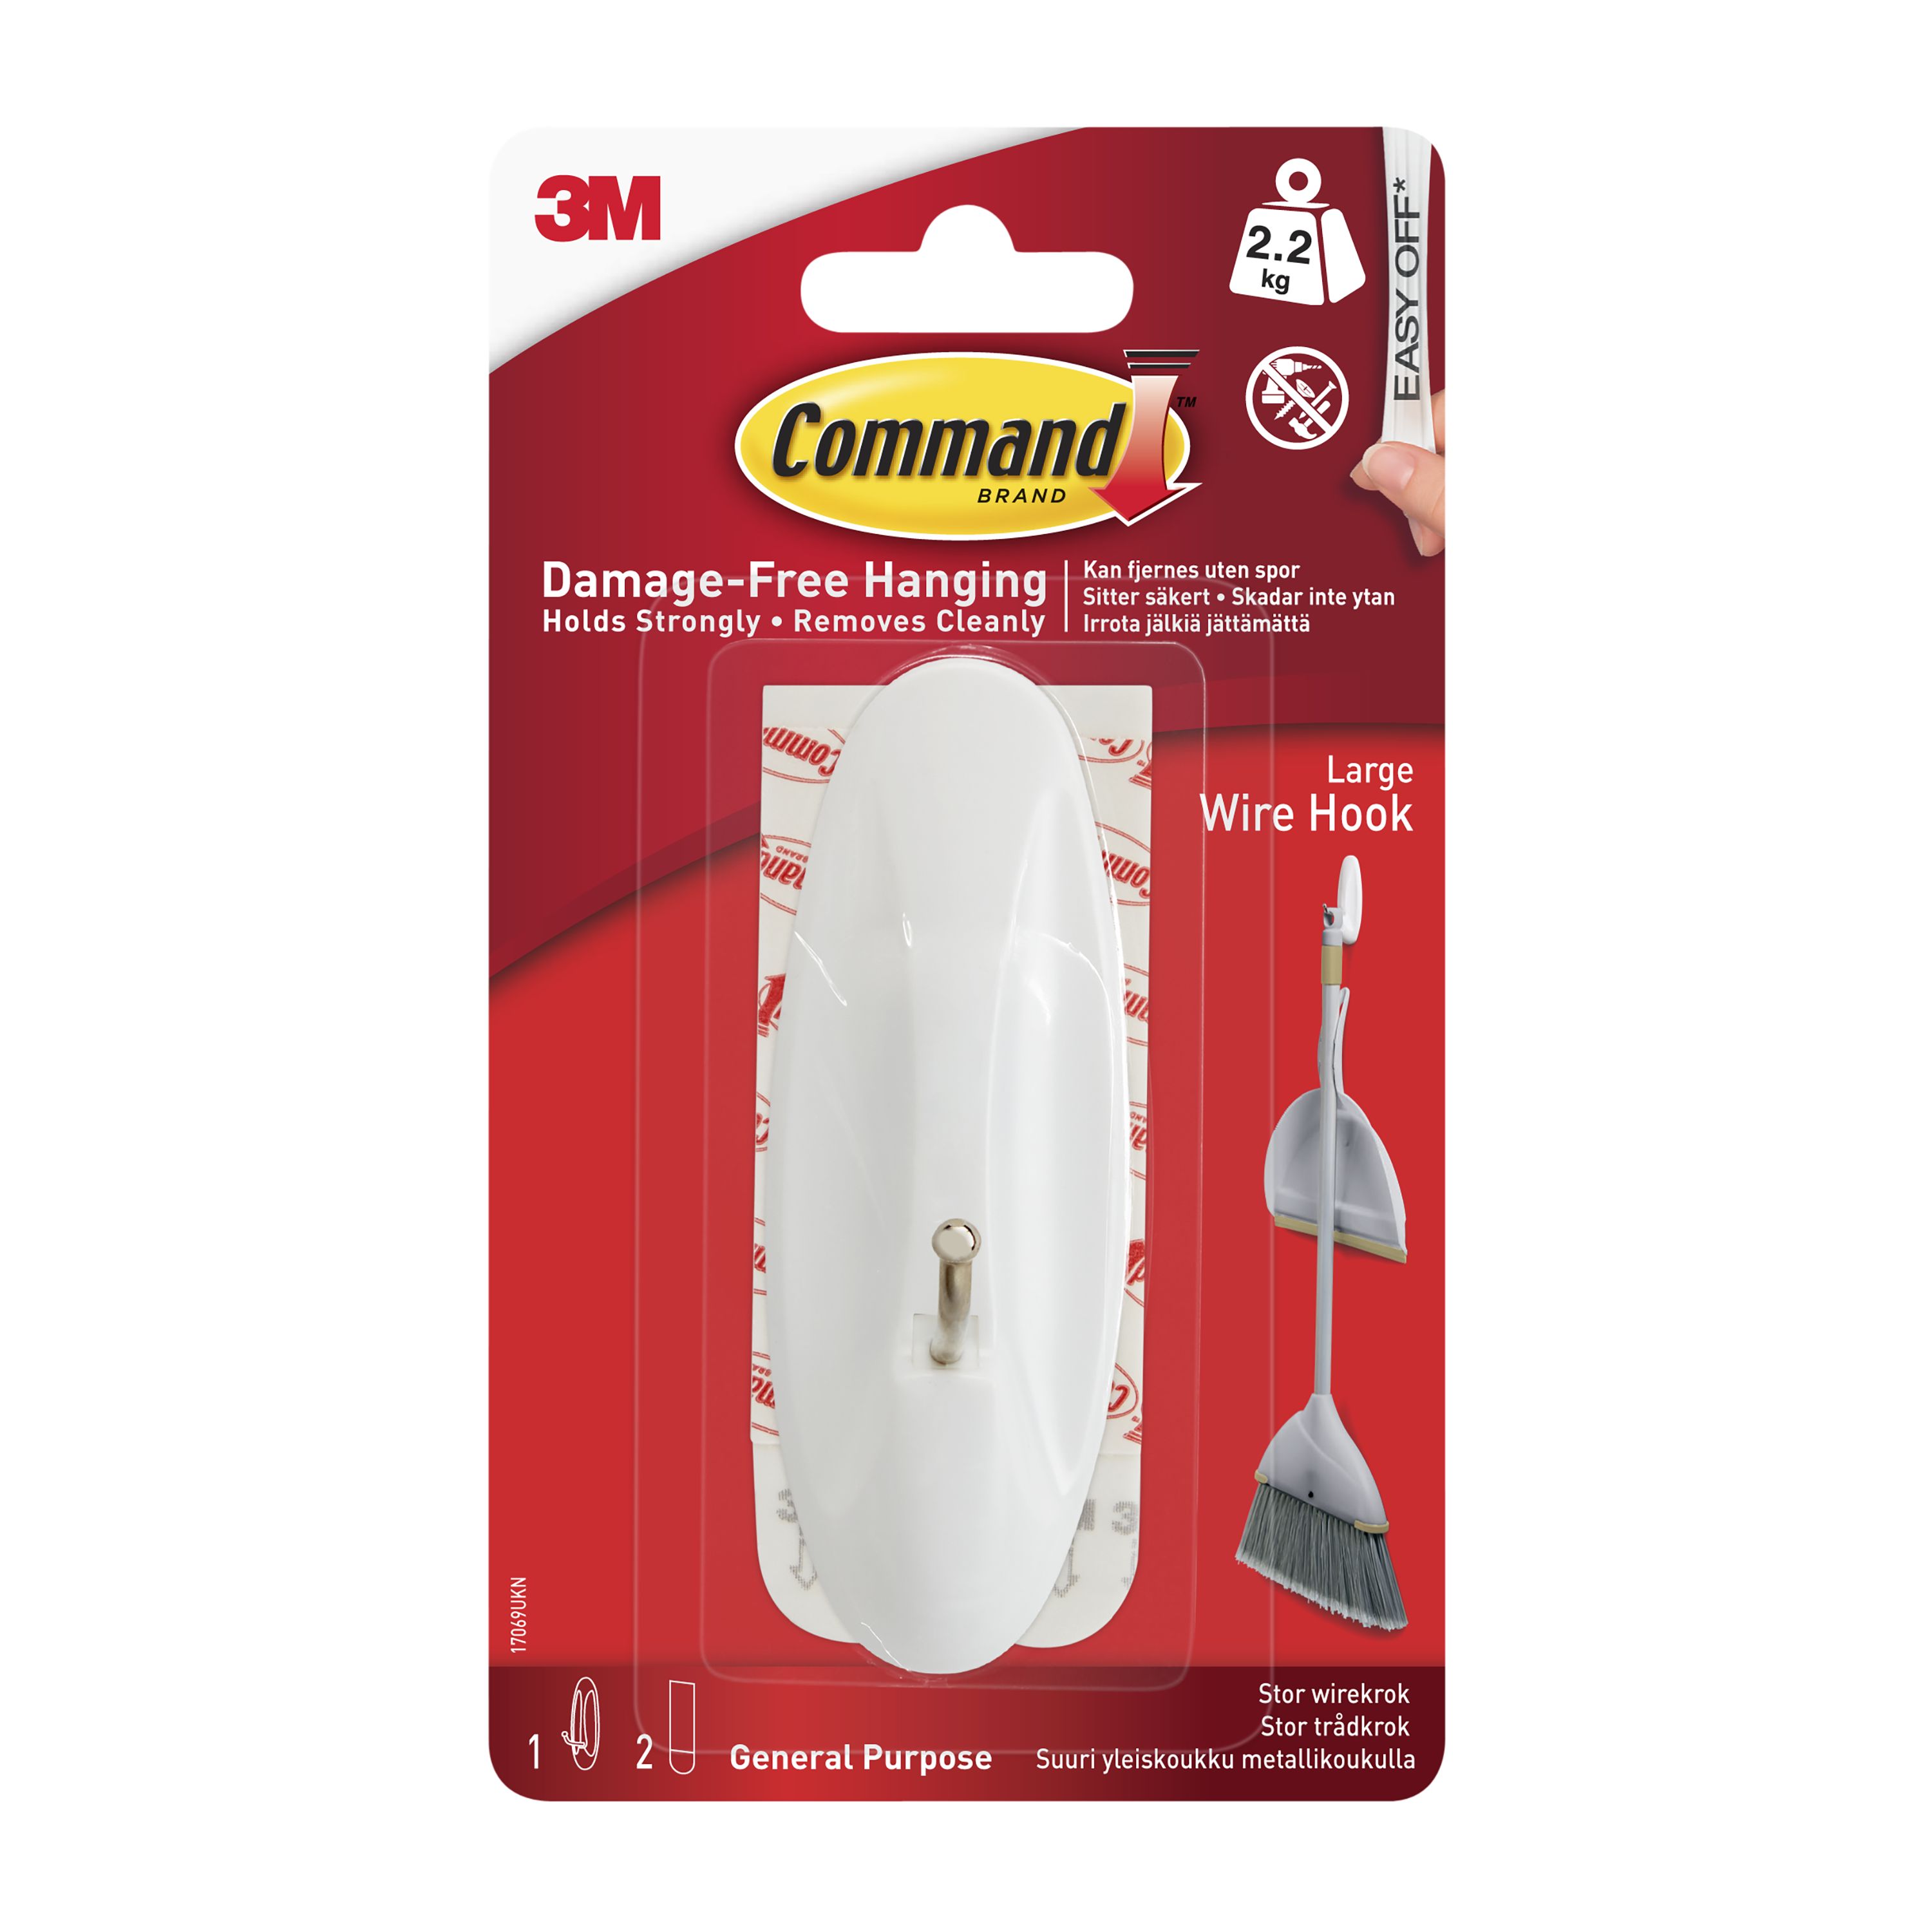 3M Command Large Single White Wire hook (Holds)2.2kg